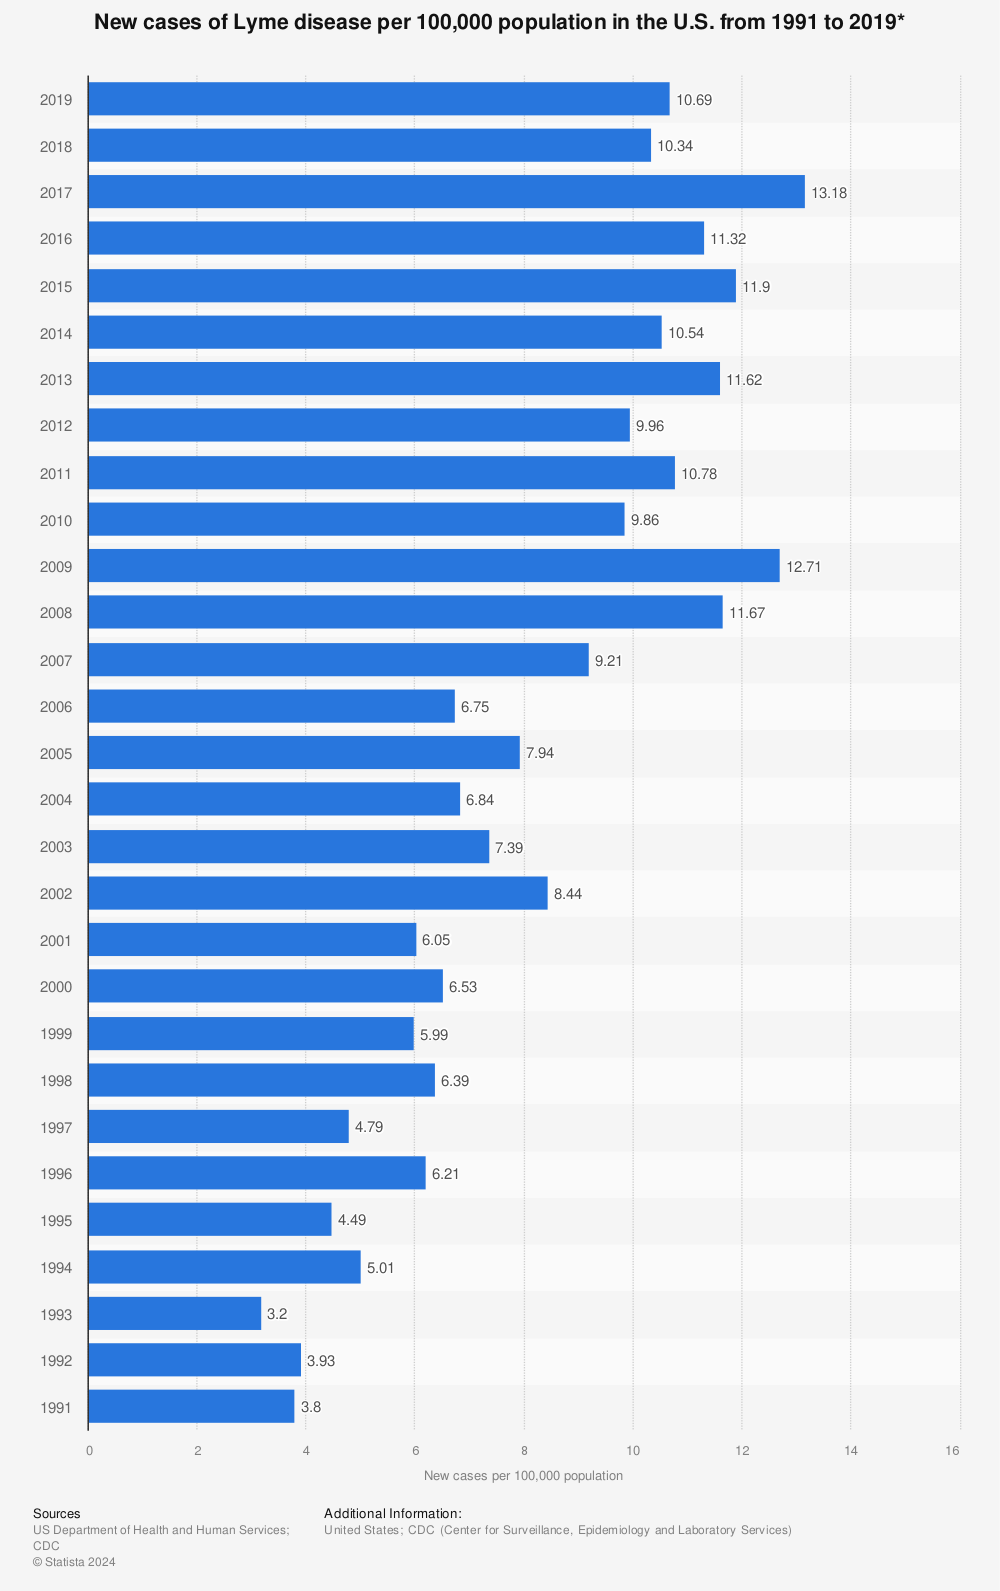 Statistic: New cases of Lyme disease per 100,000 population in the U.S. from 1991 to 2019* | Statista